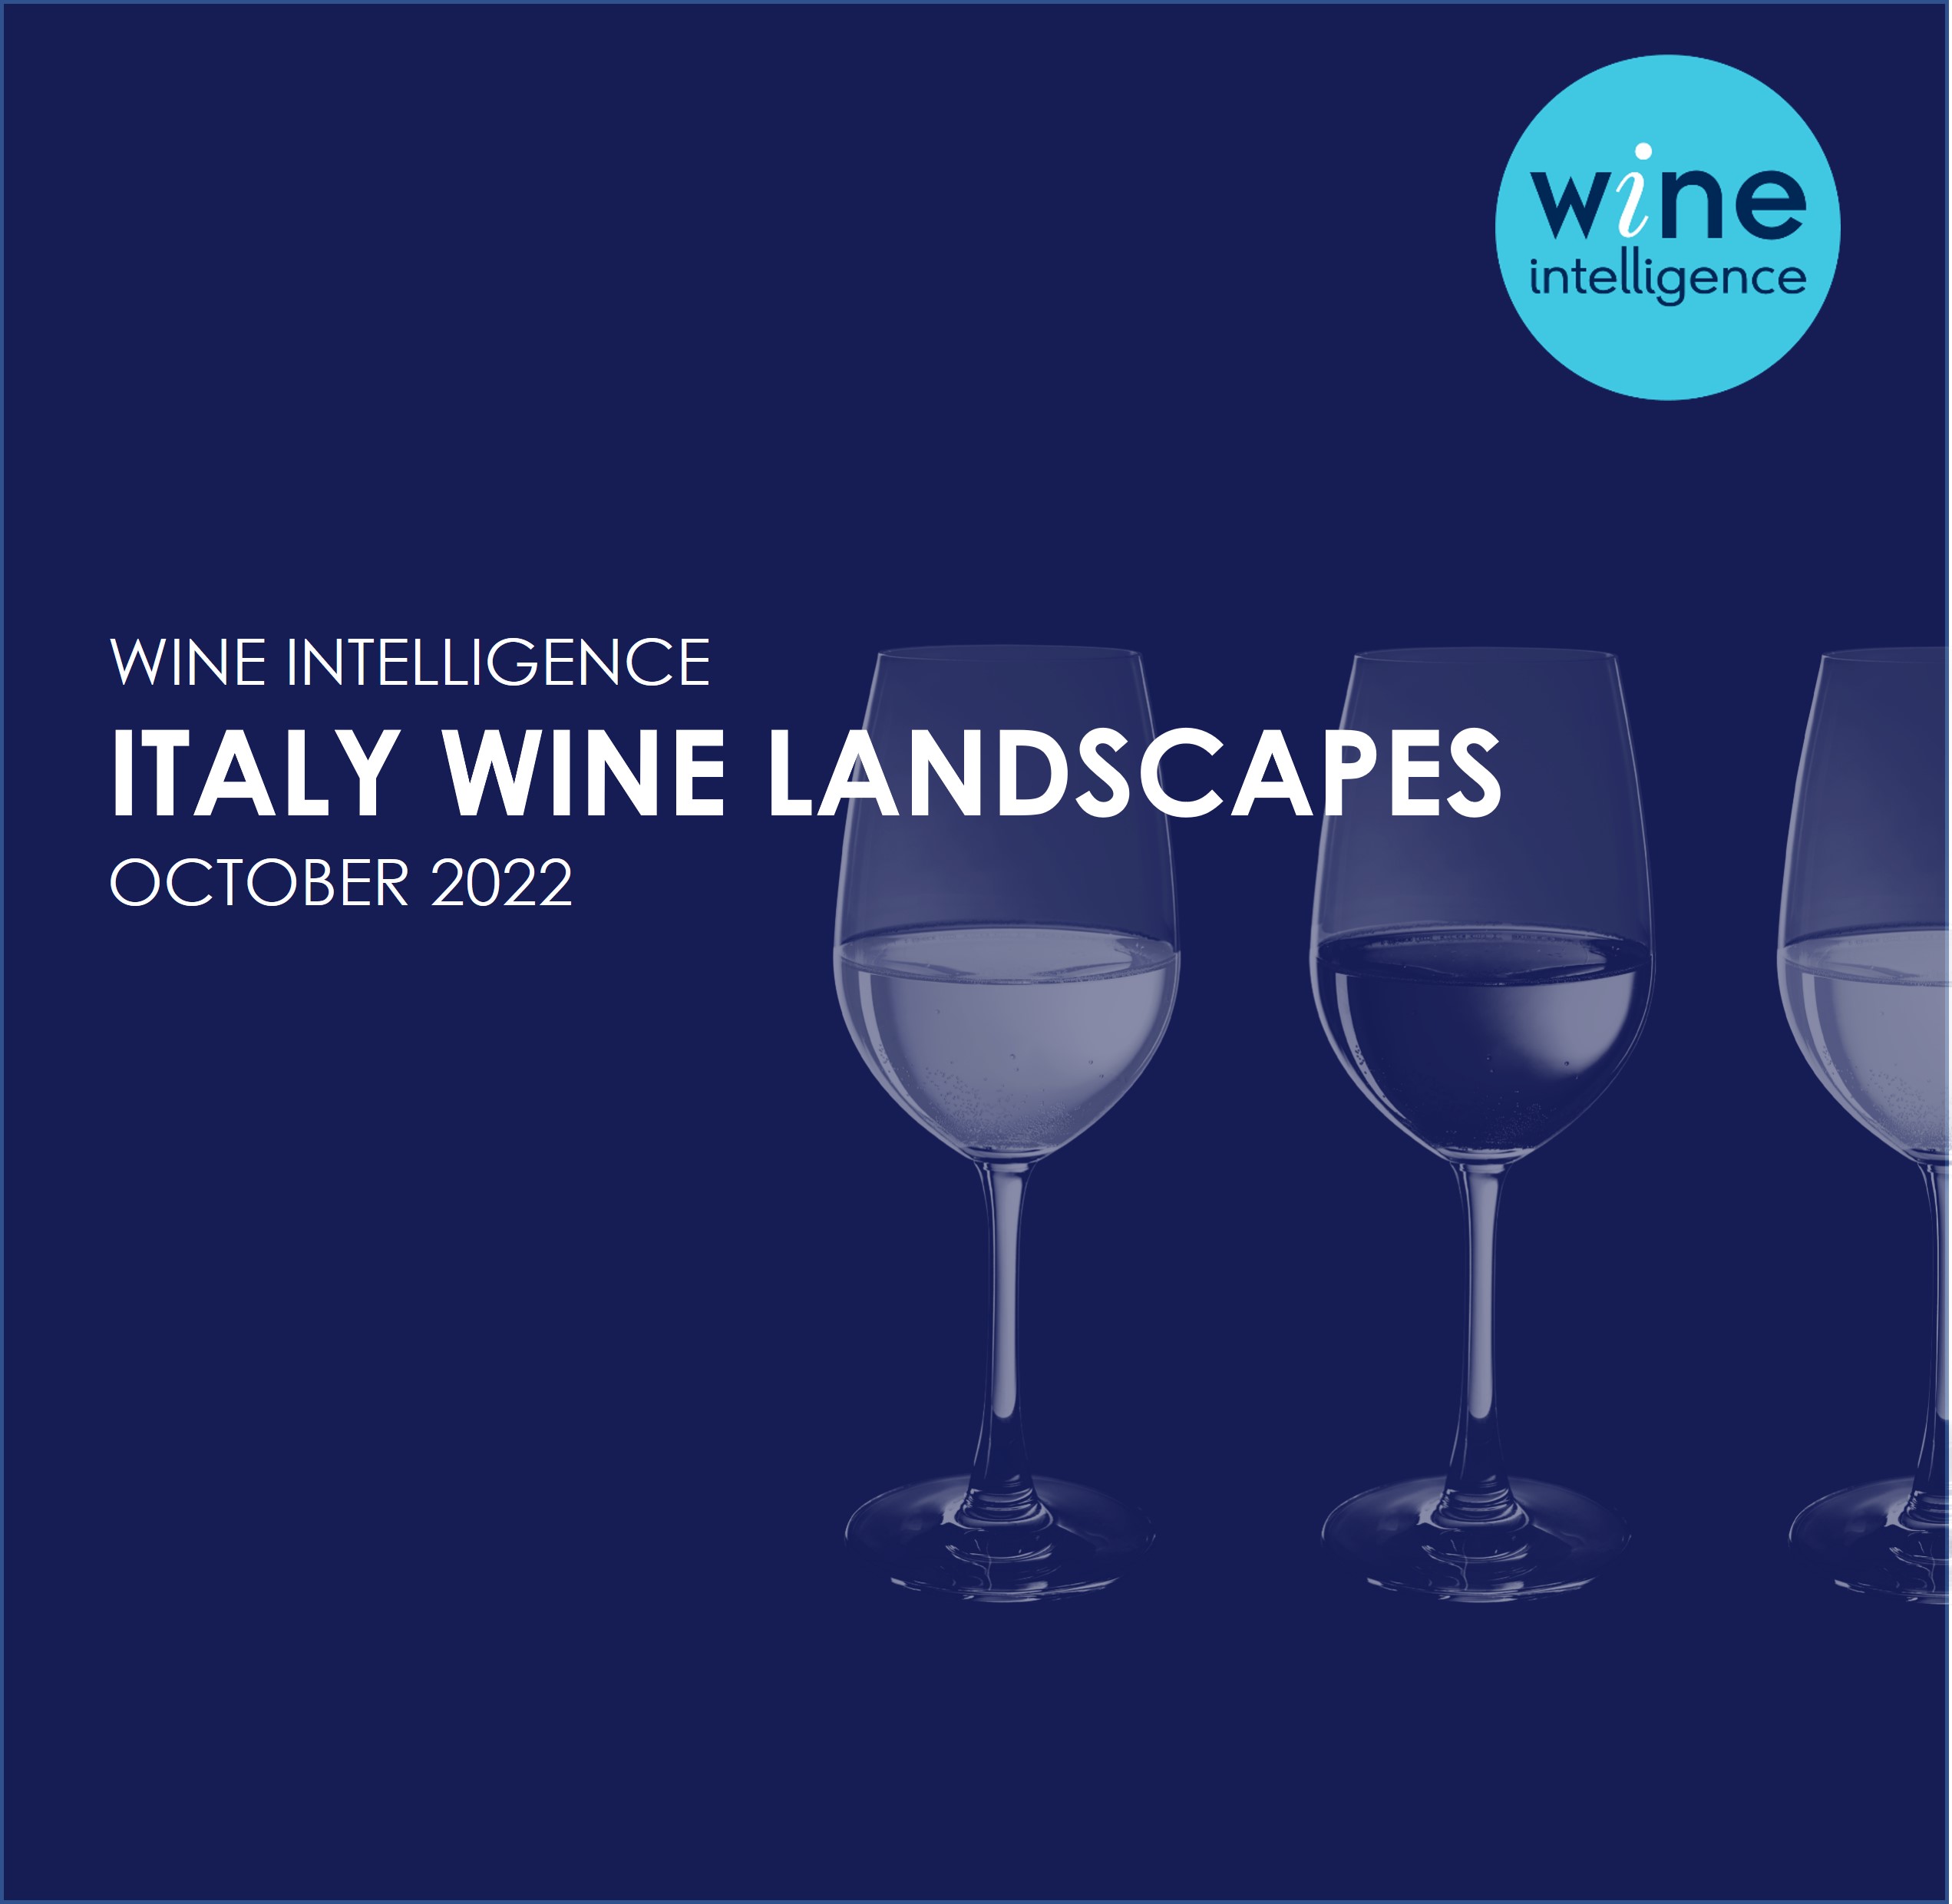 Italy wine landscapes report 2022 - View Reports